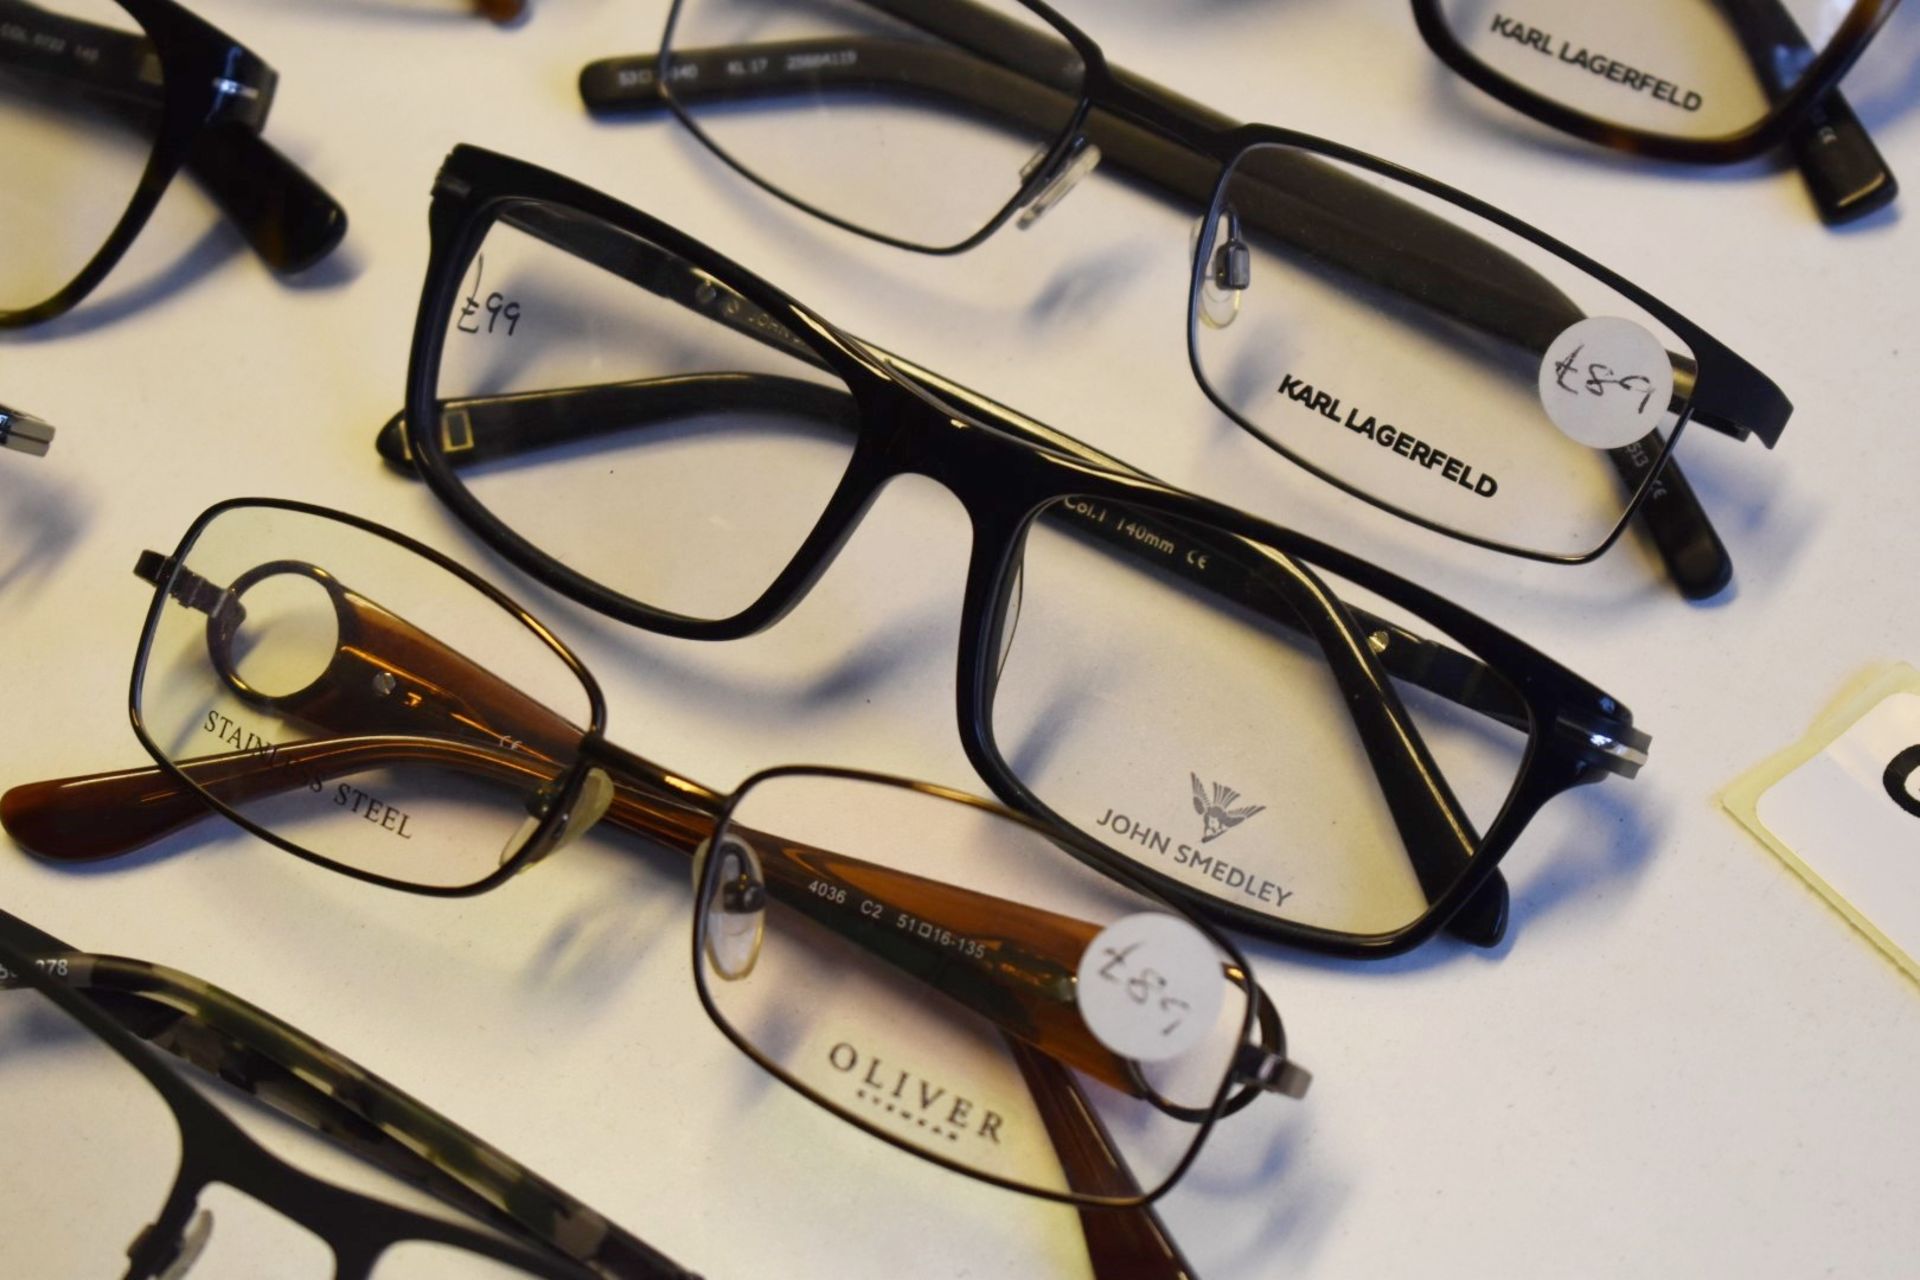 10 x Assorted Pairs of Designer Spectacle Eye Glasses - Ex Display Stock - Brands Include Diesel, - Image 6 of 10